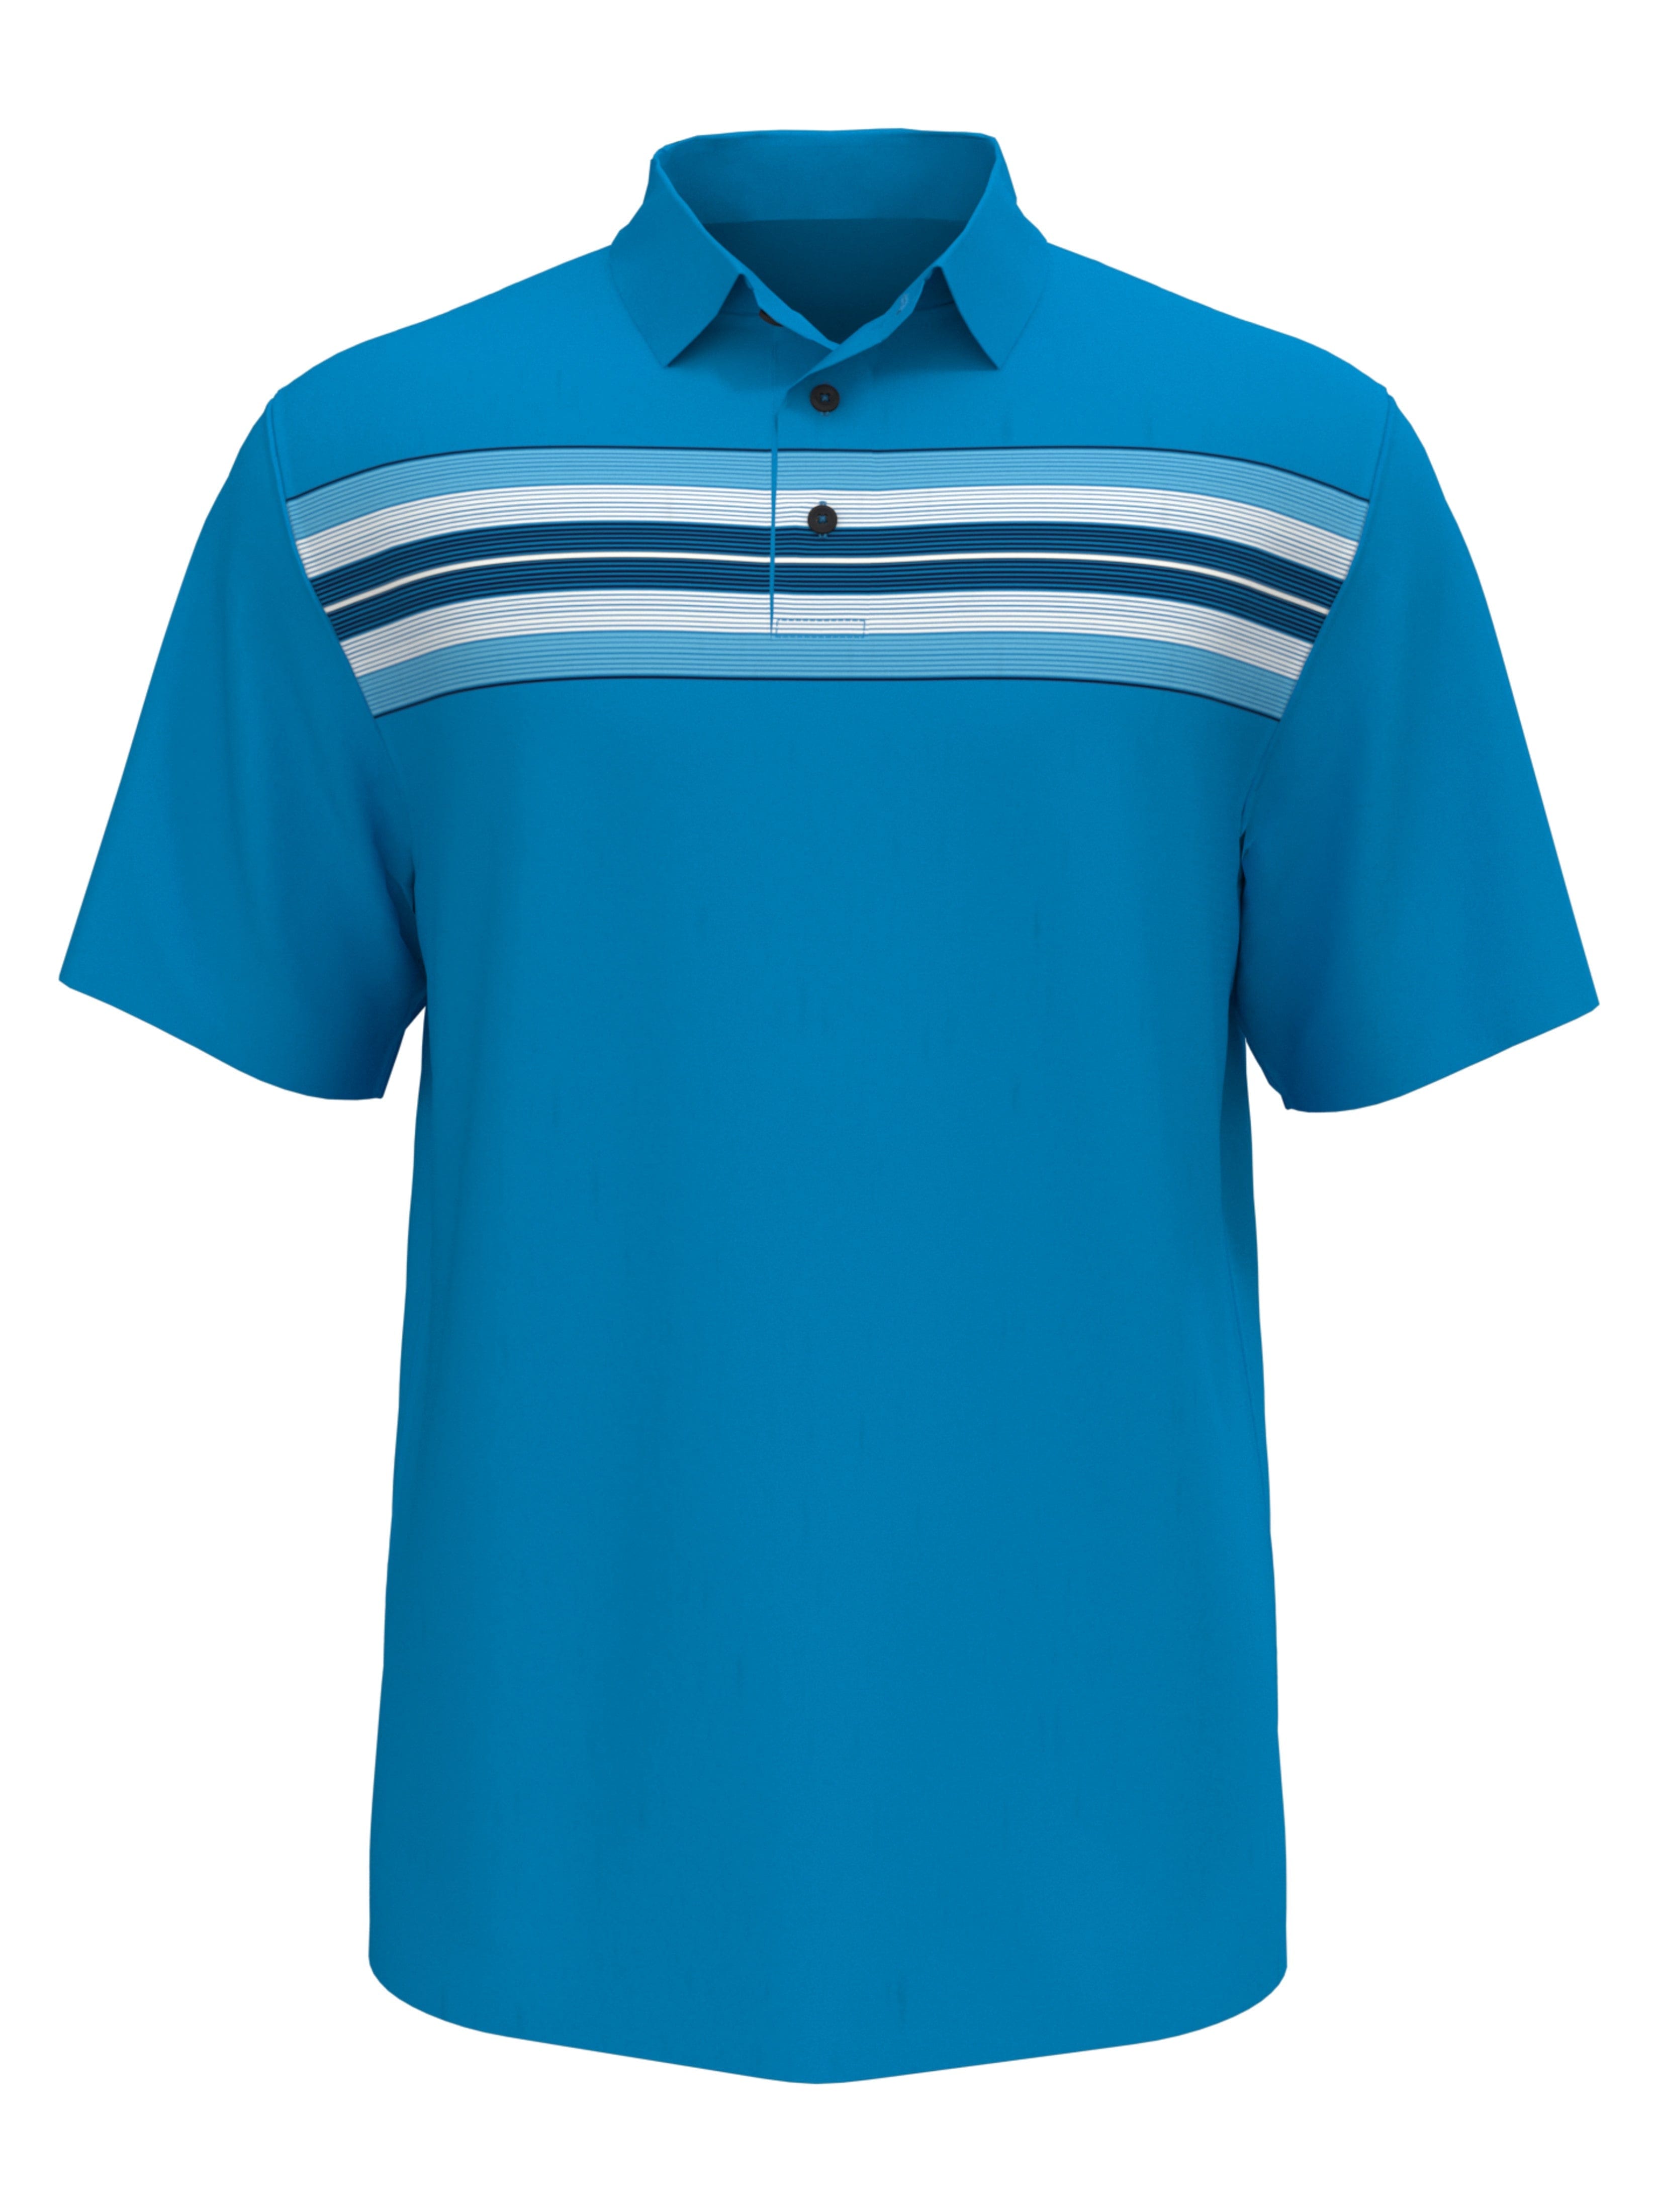 Jack Nicklaus Mens Chest Energy Stripe Polo Shirt, Size Small, Blithe Blue, 100% Polyester | Golf Apparel Shop